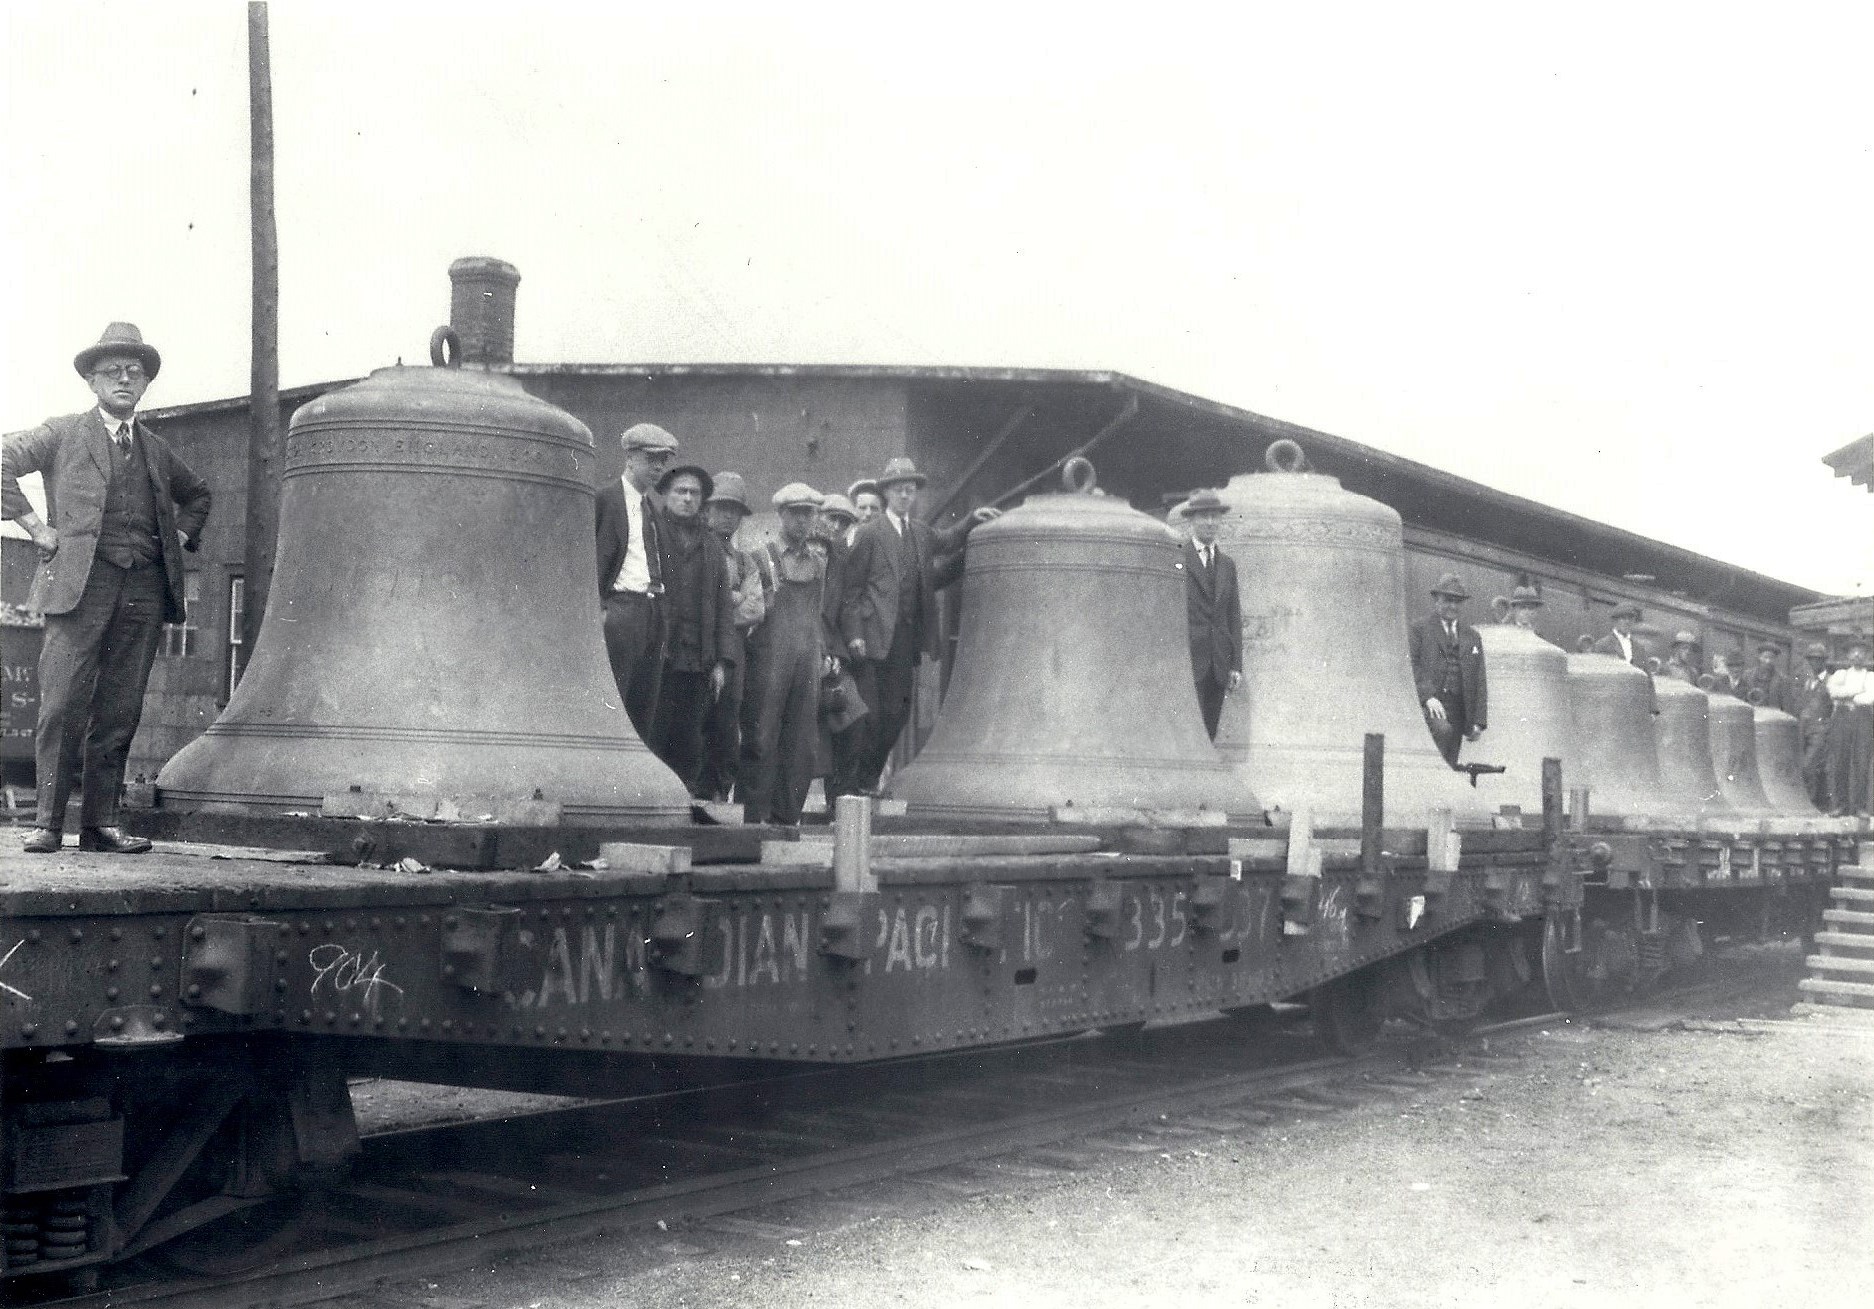 Carillon bells arrive at Ottawa’s Union Station by railway flatcar from Montreal in 1927. (Photo credit: Library and Archives Canada)